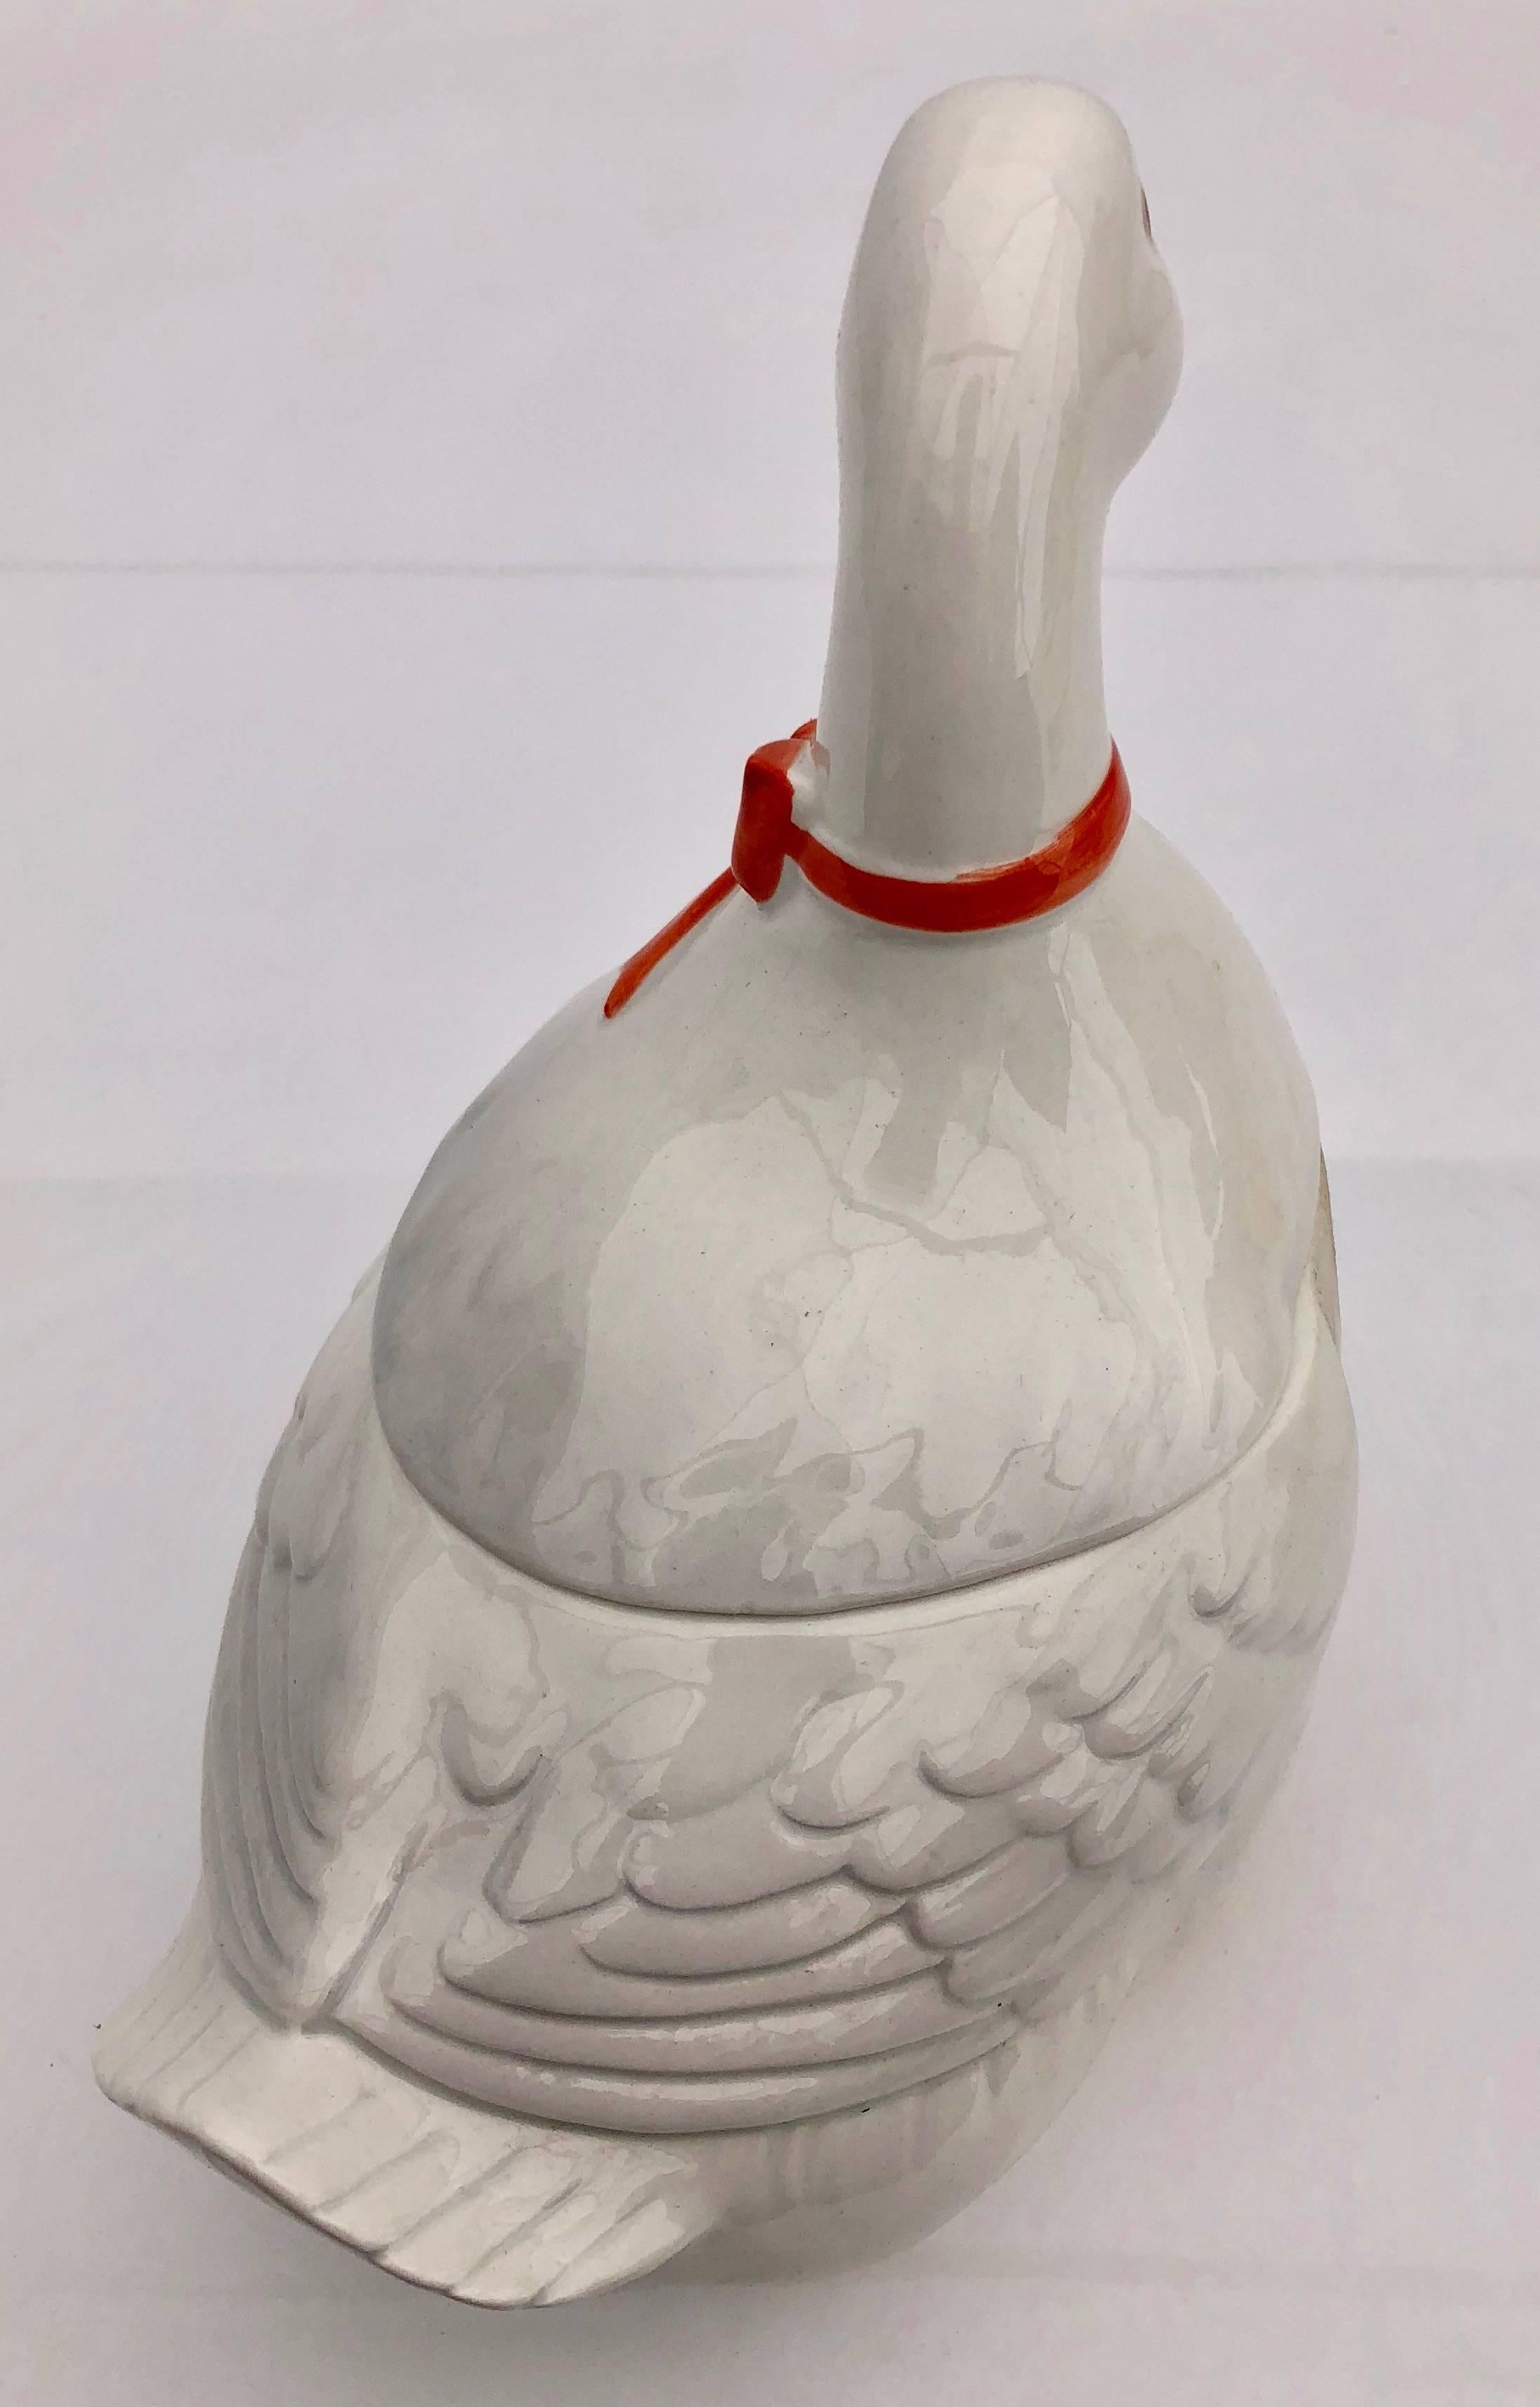 Hand-Crafted Goose Candy Jar Ceramic Handcrafted by Otagiri, Japan, 1983 in It's Original Box For Sale